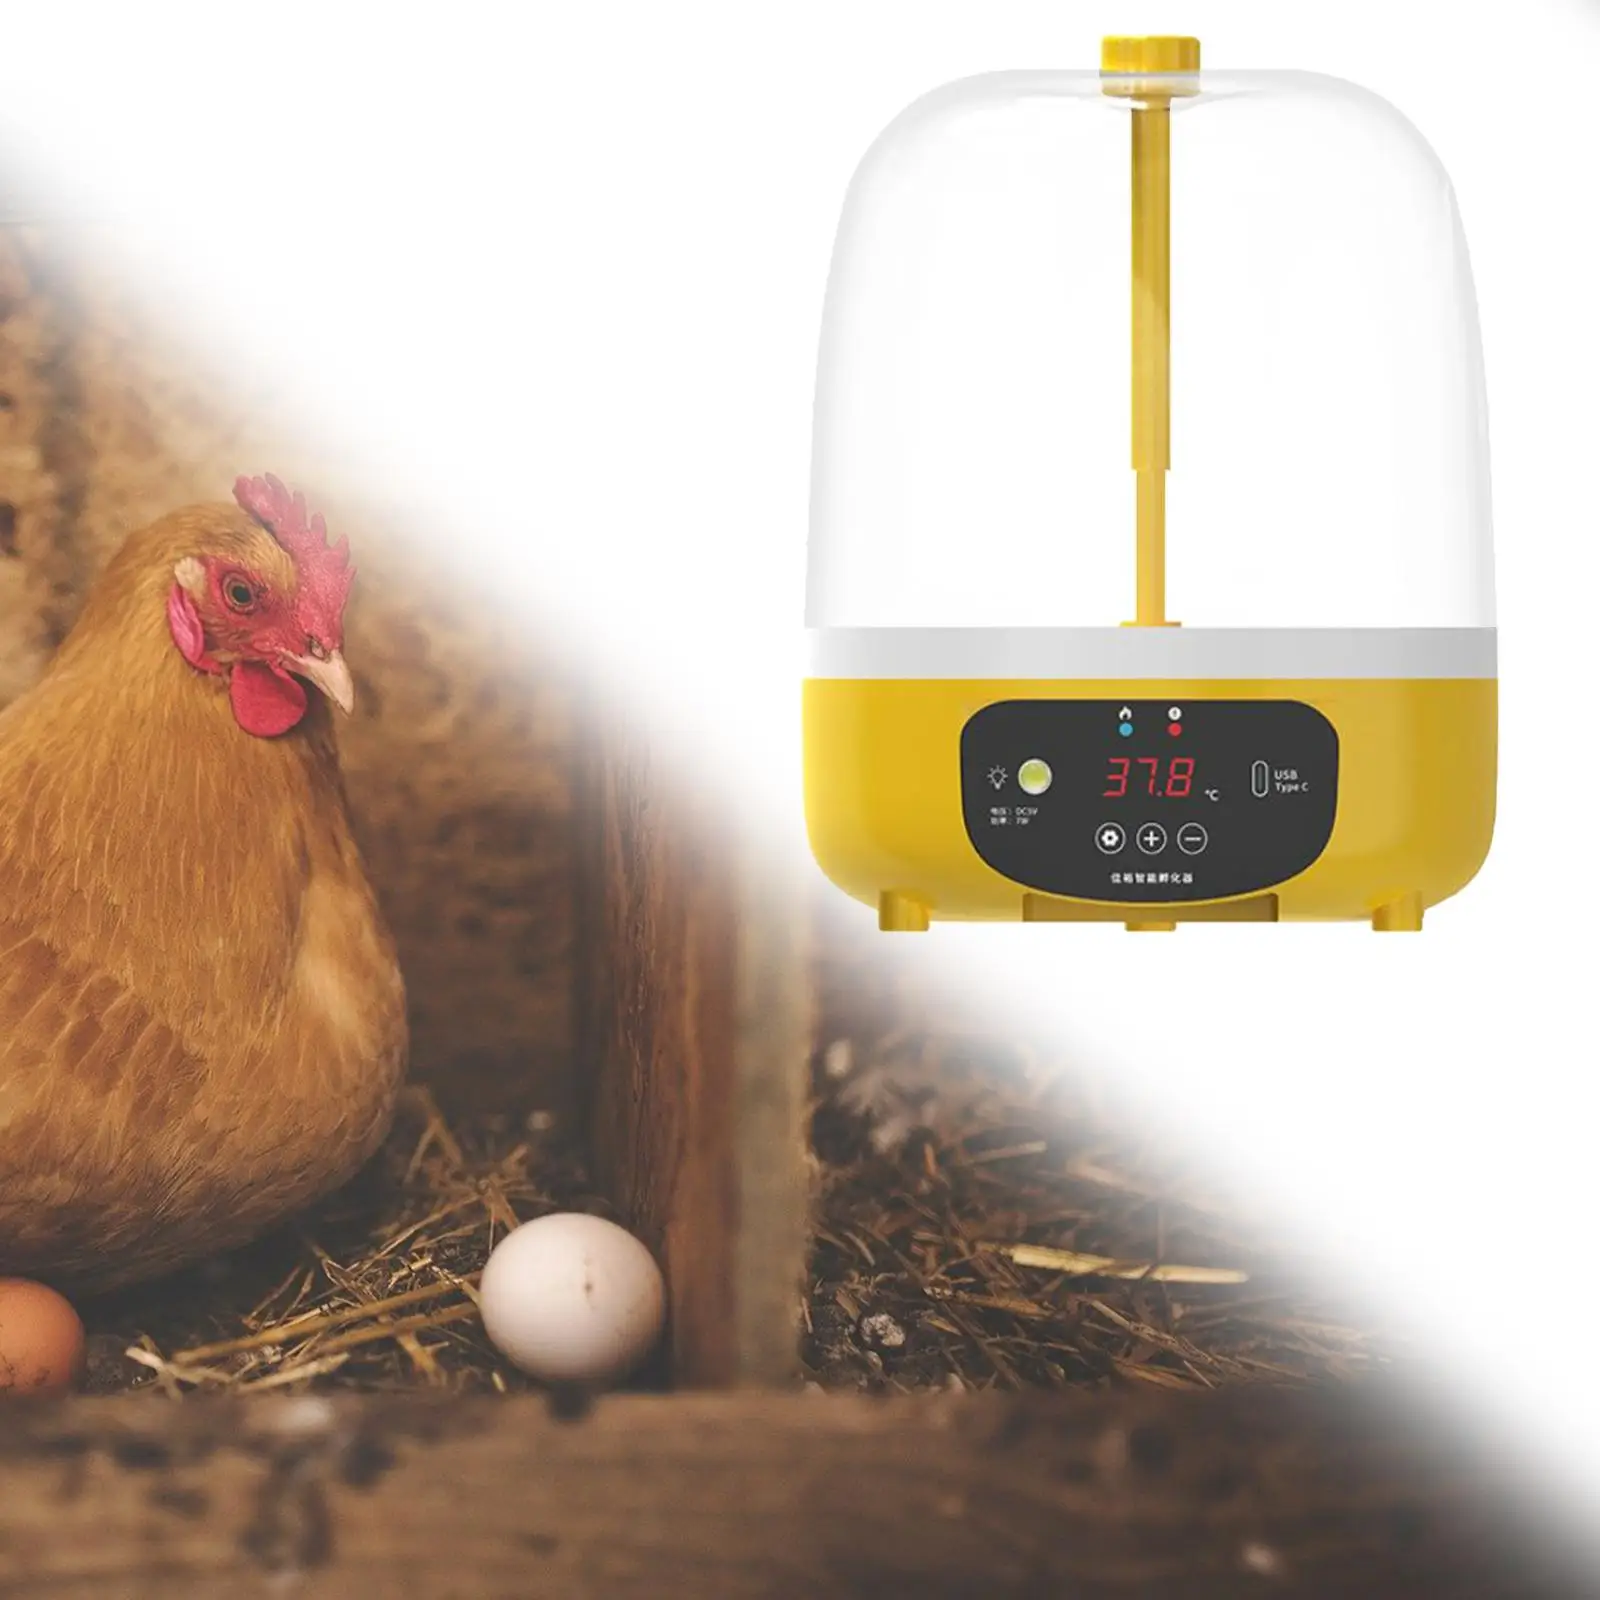 Portable Digital Automatic Egg Incubator 5 Eggs Auto Turner Small Poultry Hatcher Machine for Hatching Parakeet Quail Goose Bird